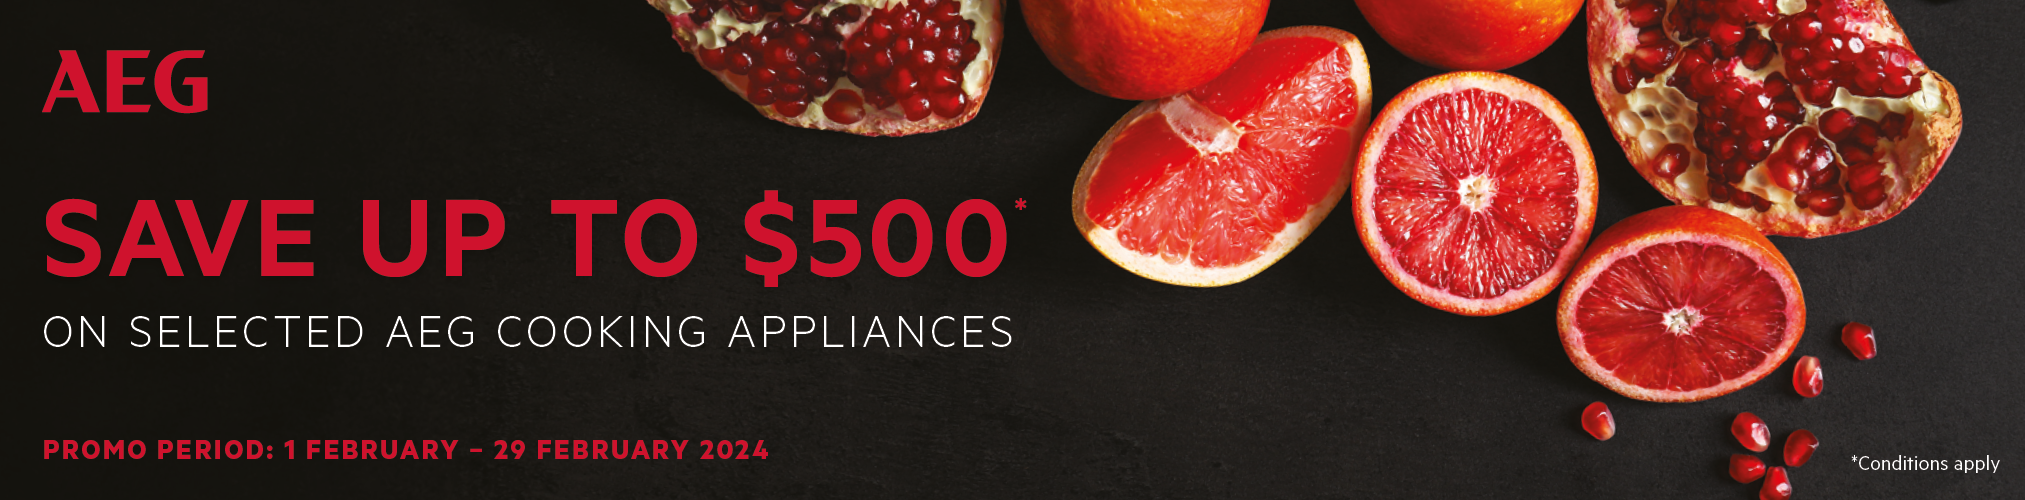 Save Up To $500* on Selected AEG Kitchen Appliances